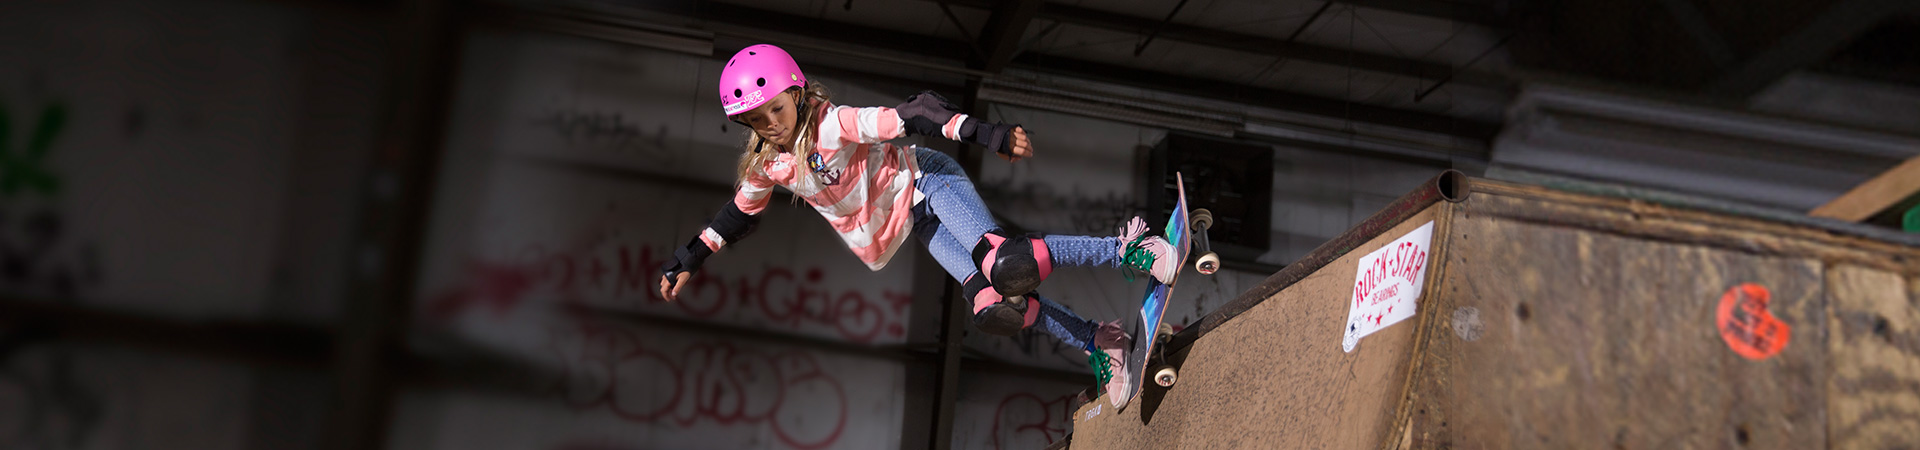  young girl skateboarding on ramp doing trick with pink helmet 